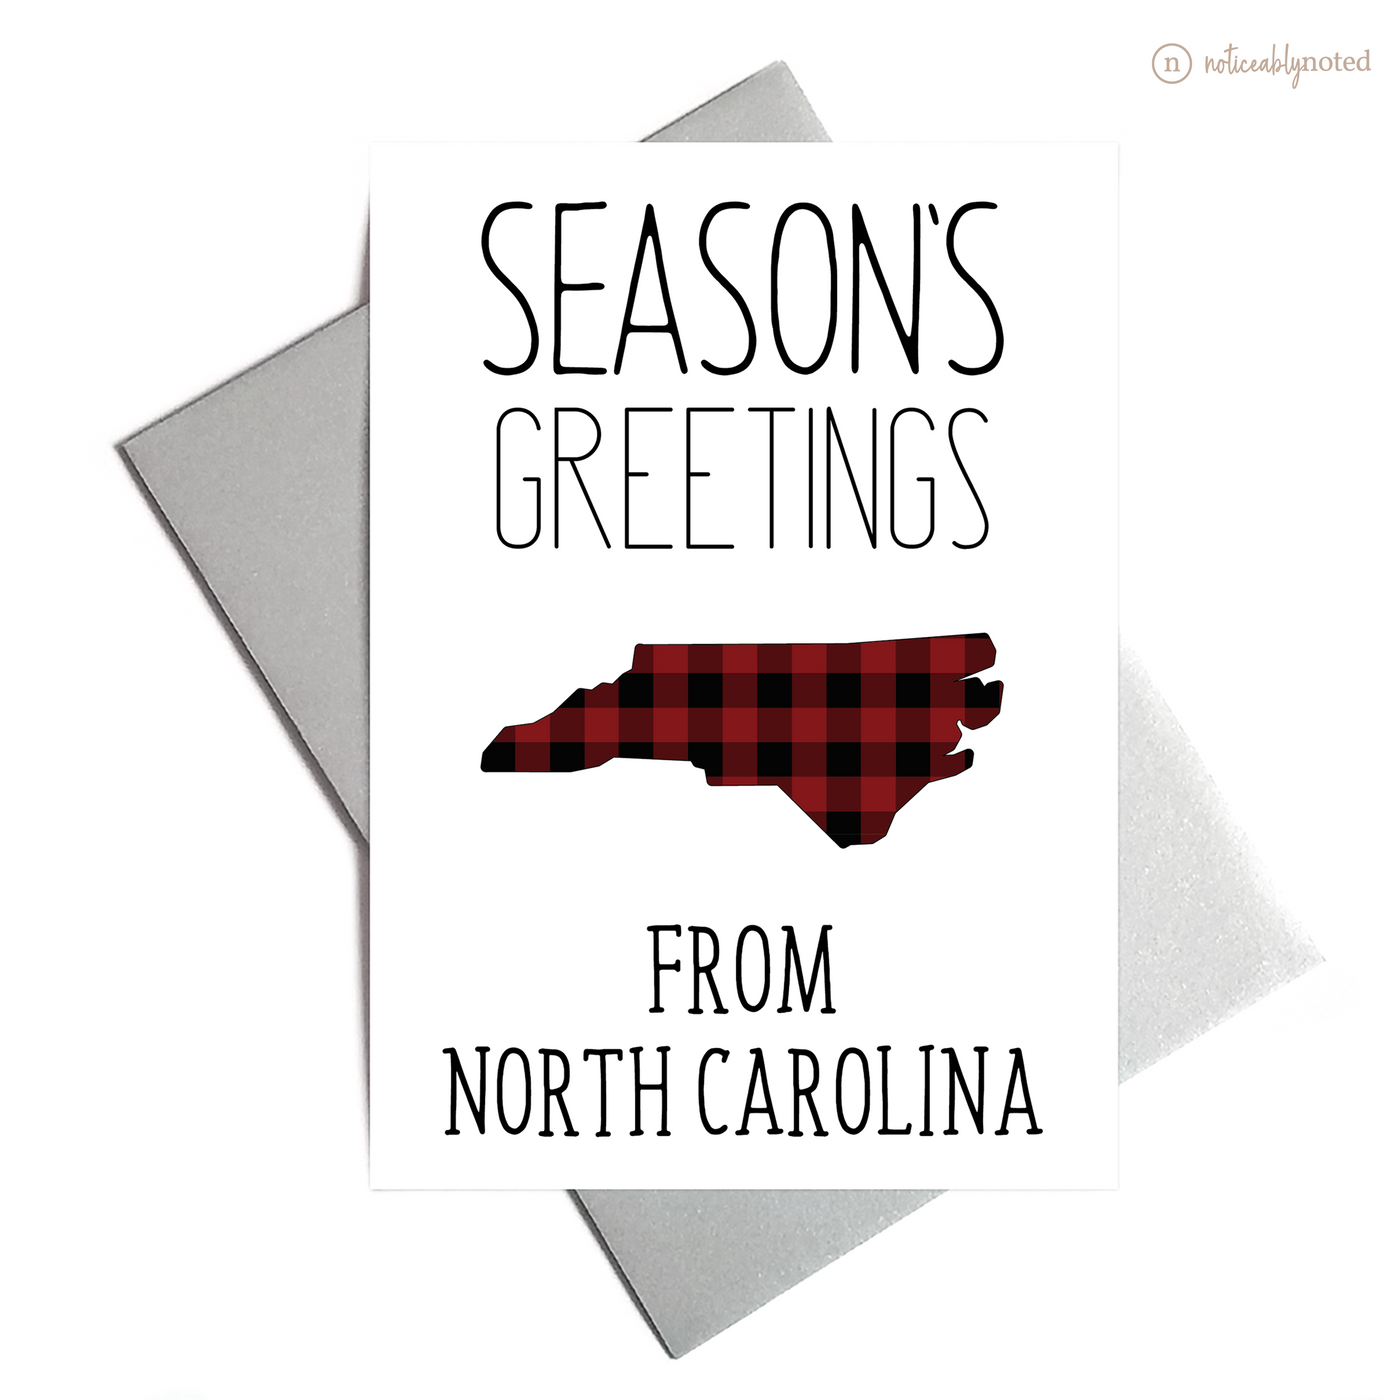 North Carolina Christmas Cards | Noticeably Noted